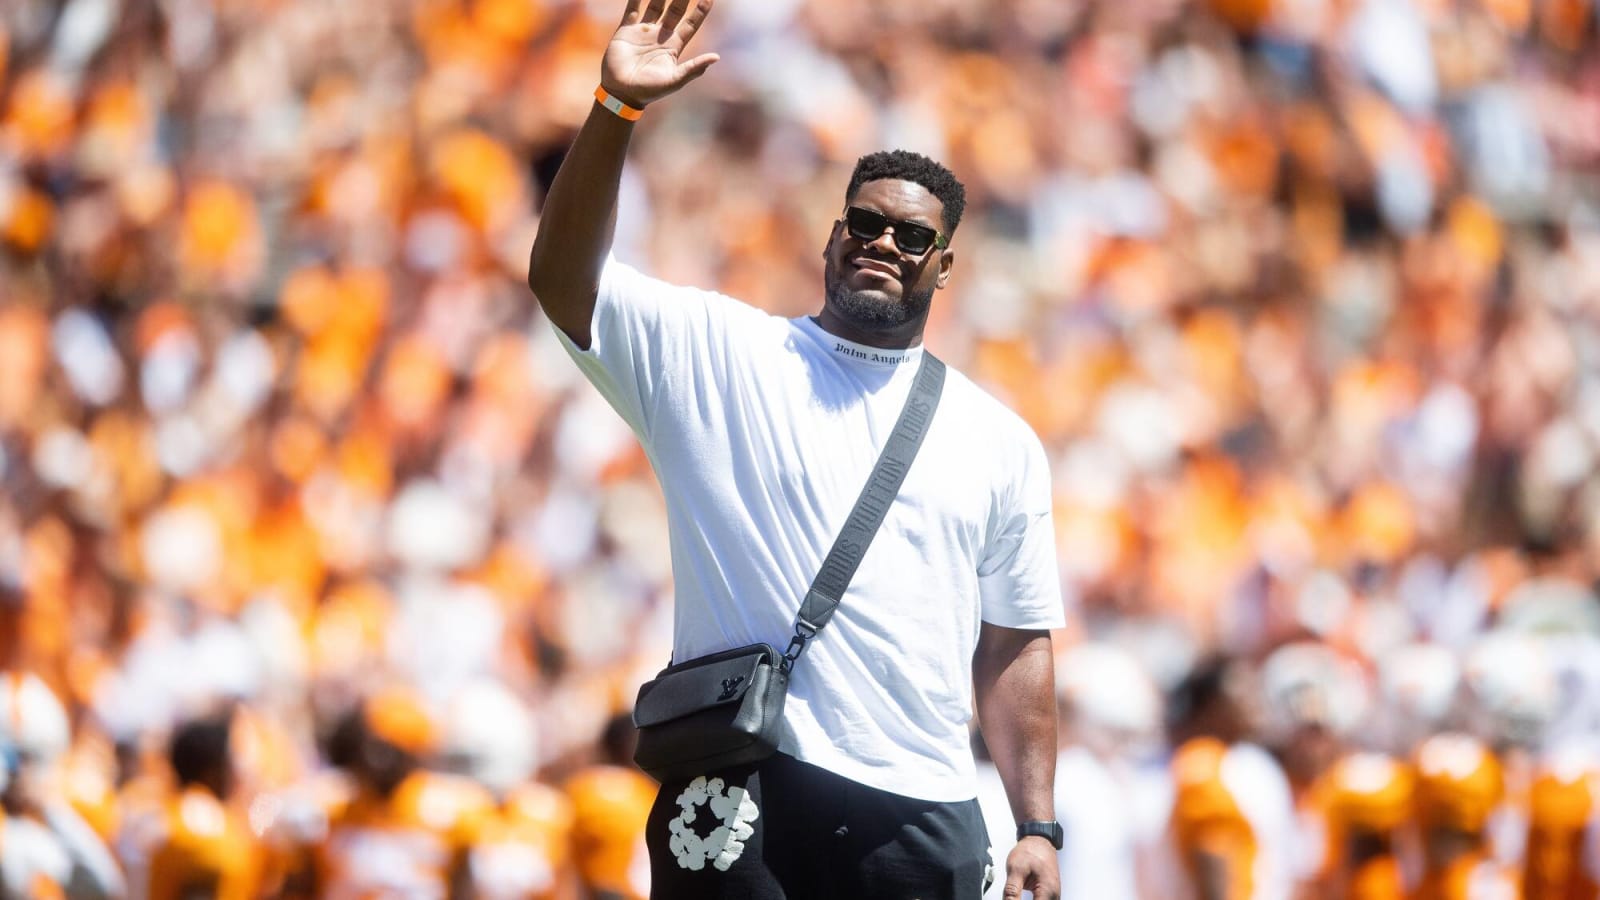 Vols legend Trey Smith goes viral after appearing during WWE event with Chiefs QB Patrick Mahomes